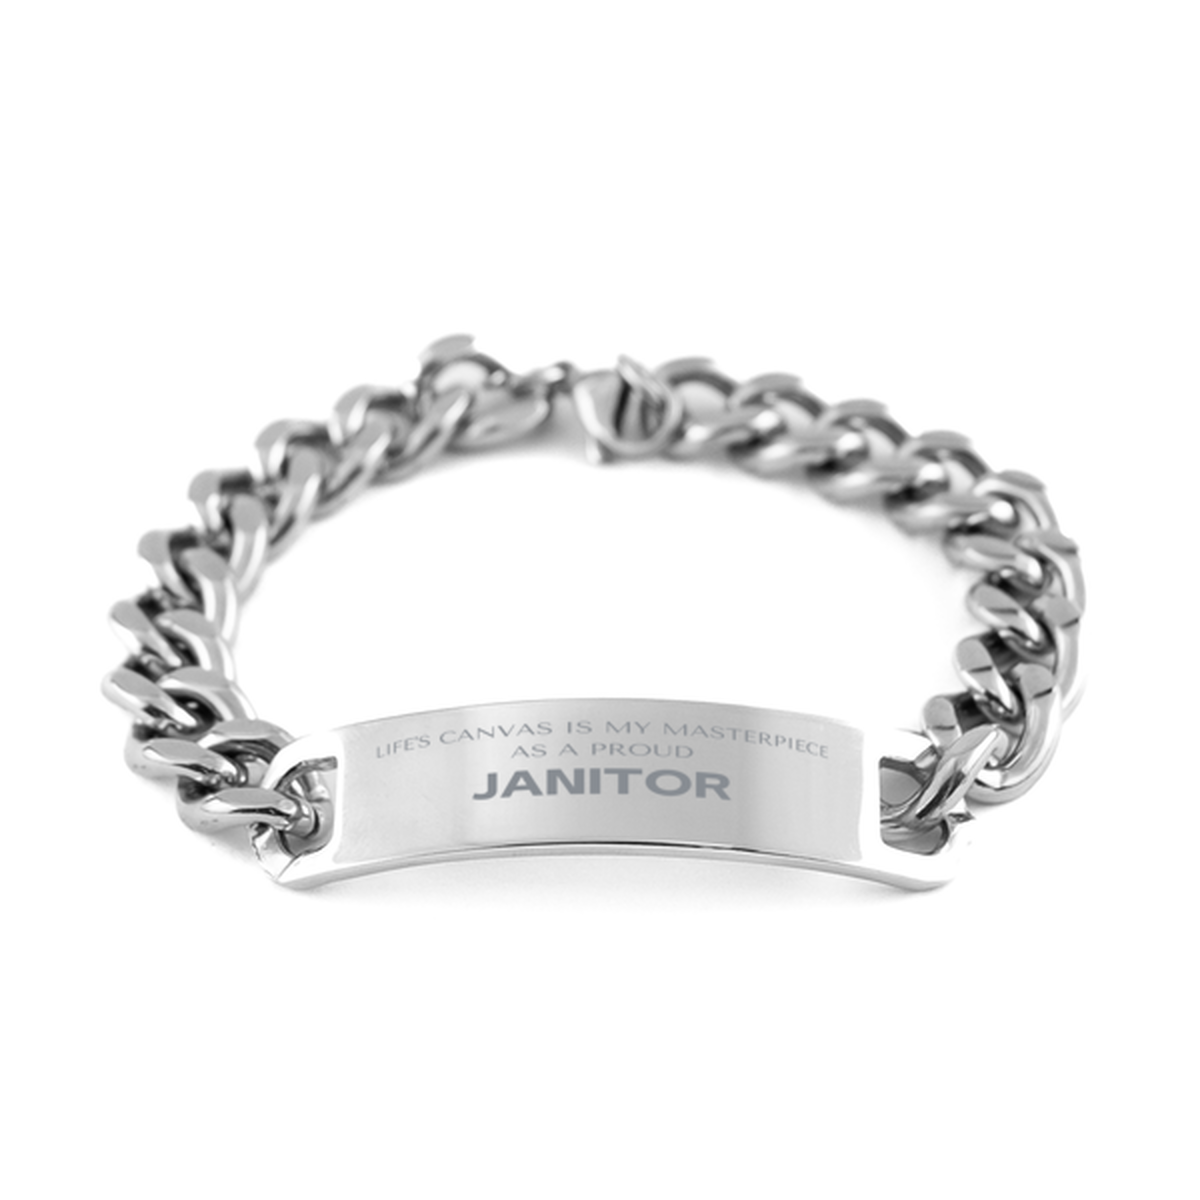 Proud Janitor Gifts, Life's canvas is my masterpiece, Epic Birthday Christmas Unique Cuban Chain Stainless Steel Bracelet For Janitor, Coworkers, Men, Women, Friends